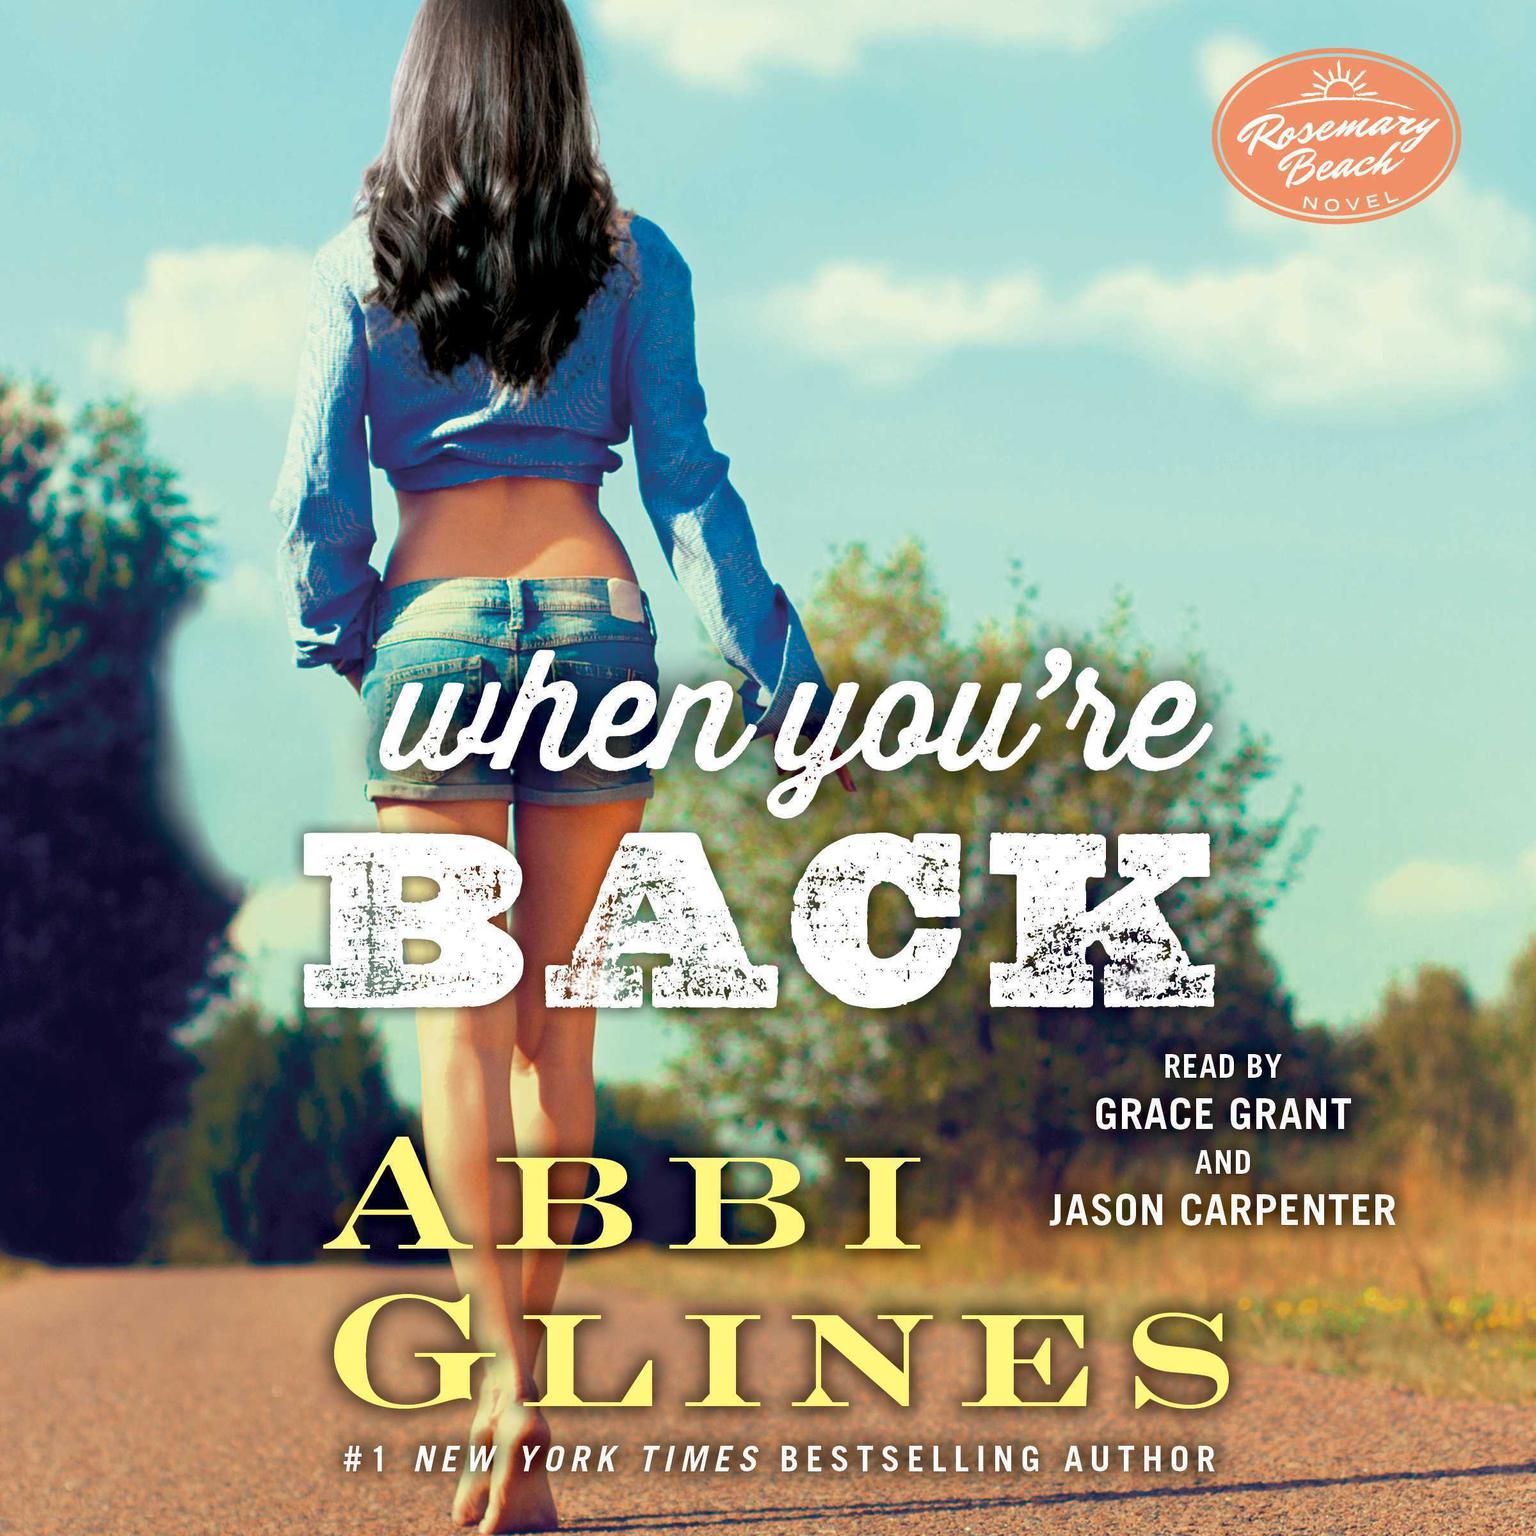 When Youre Back: A Rosemary Beach Novel Audiobook, by Abbi Glines